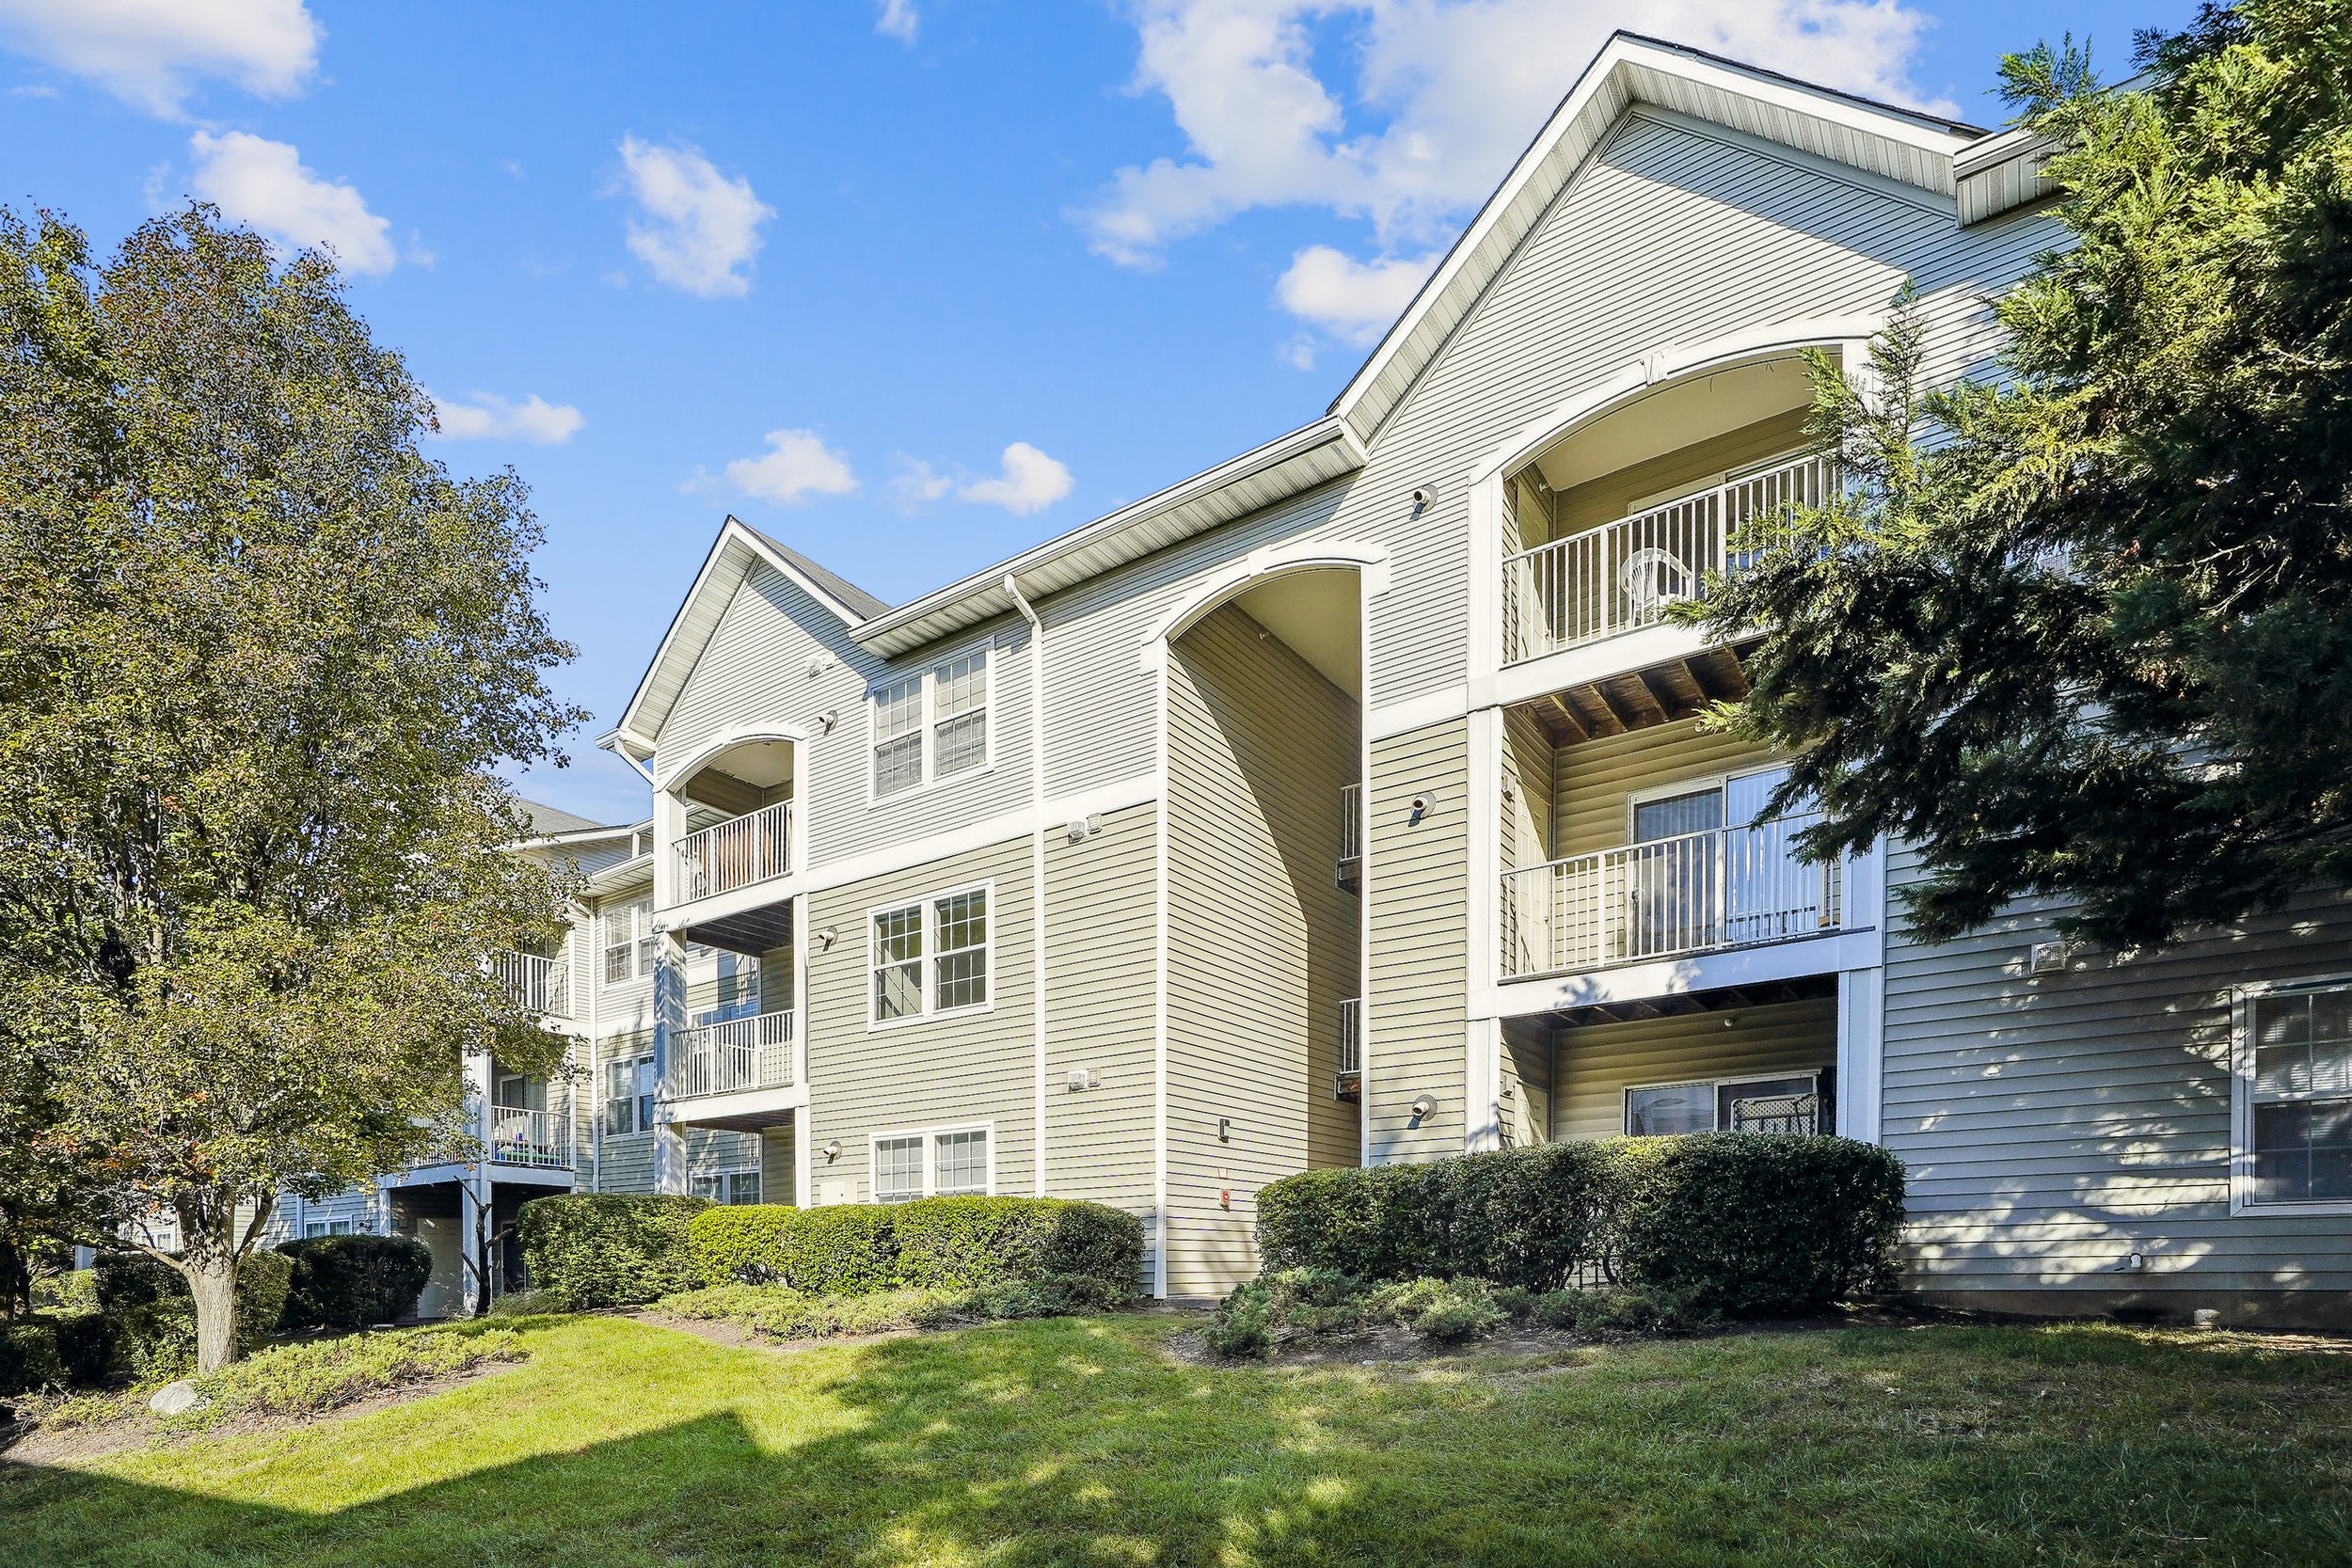  Affordable housing community with 2- and 3- bedrooms in Herndon, VA. 